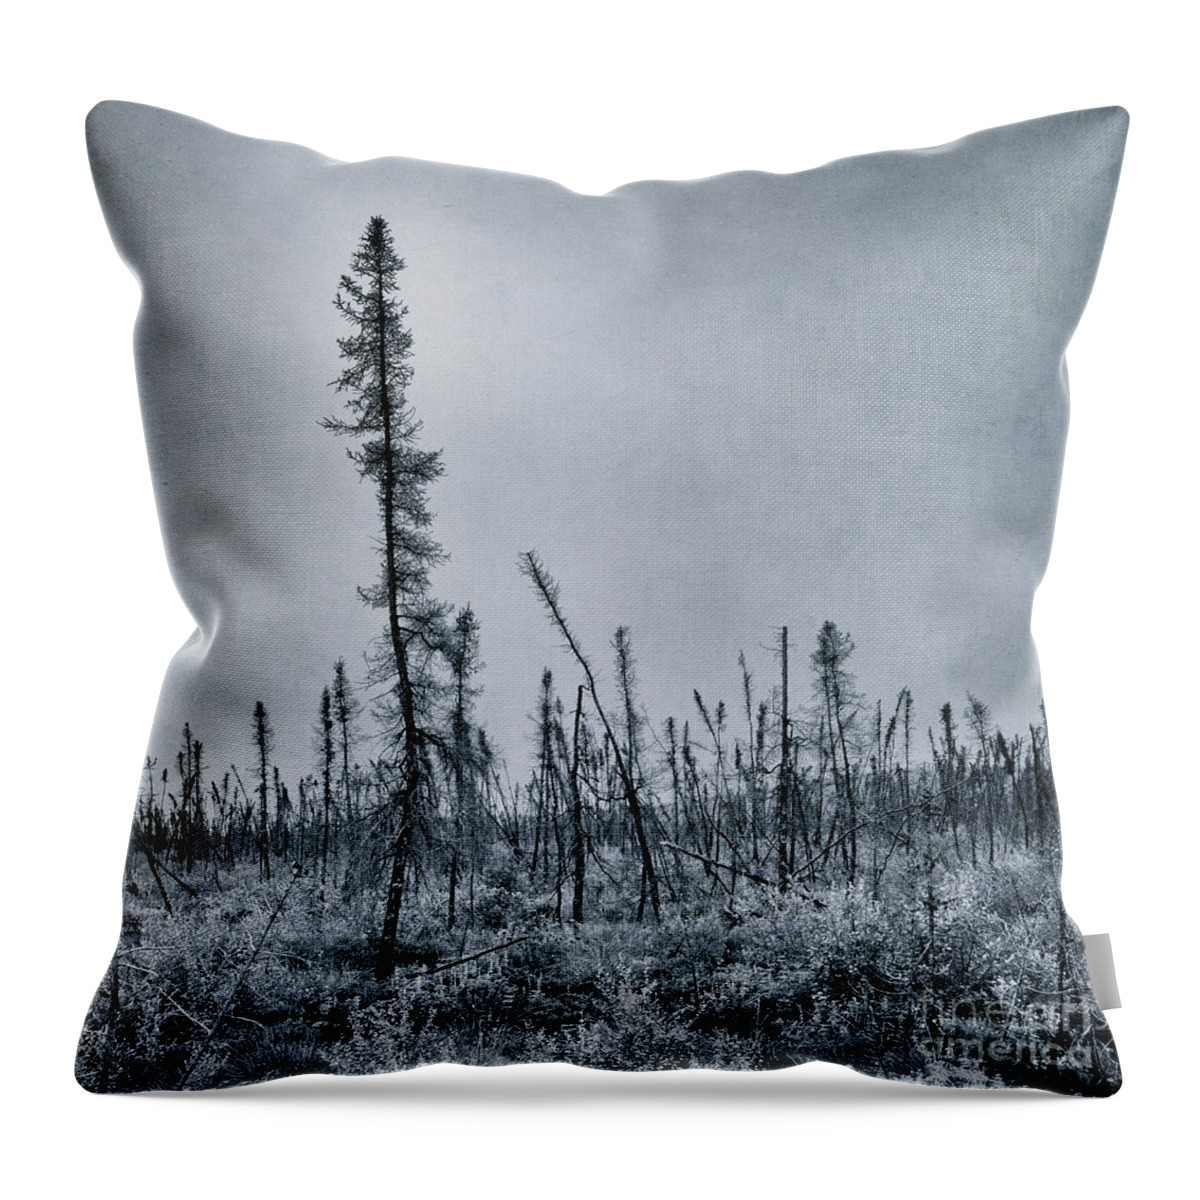  Throw Pillow featuring the photograph Land Shapes 21 by Priska Wettstein